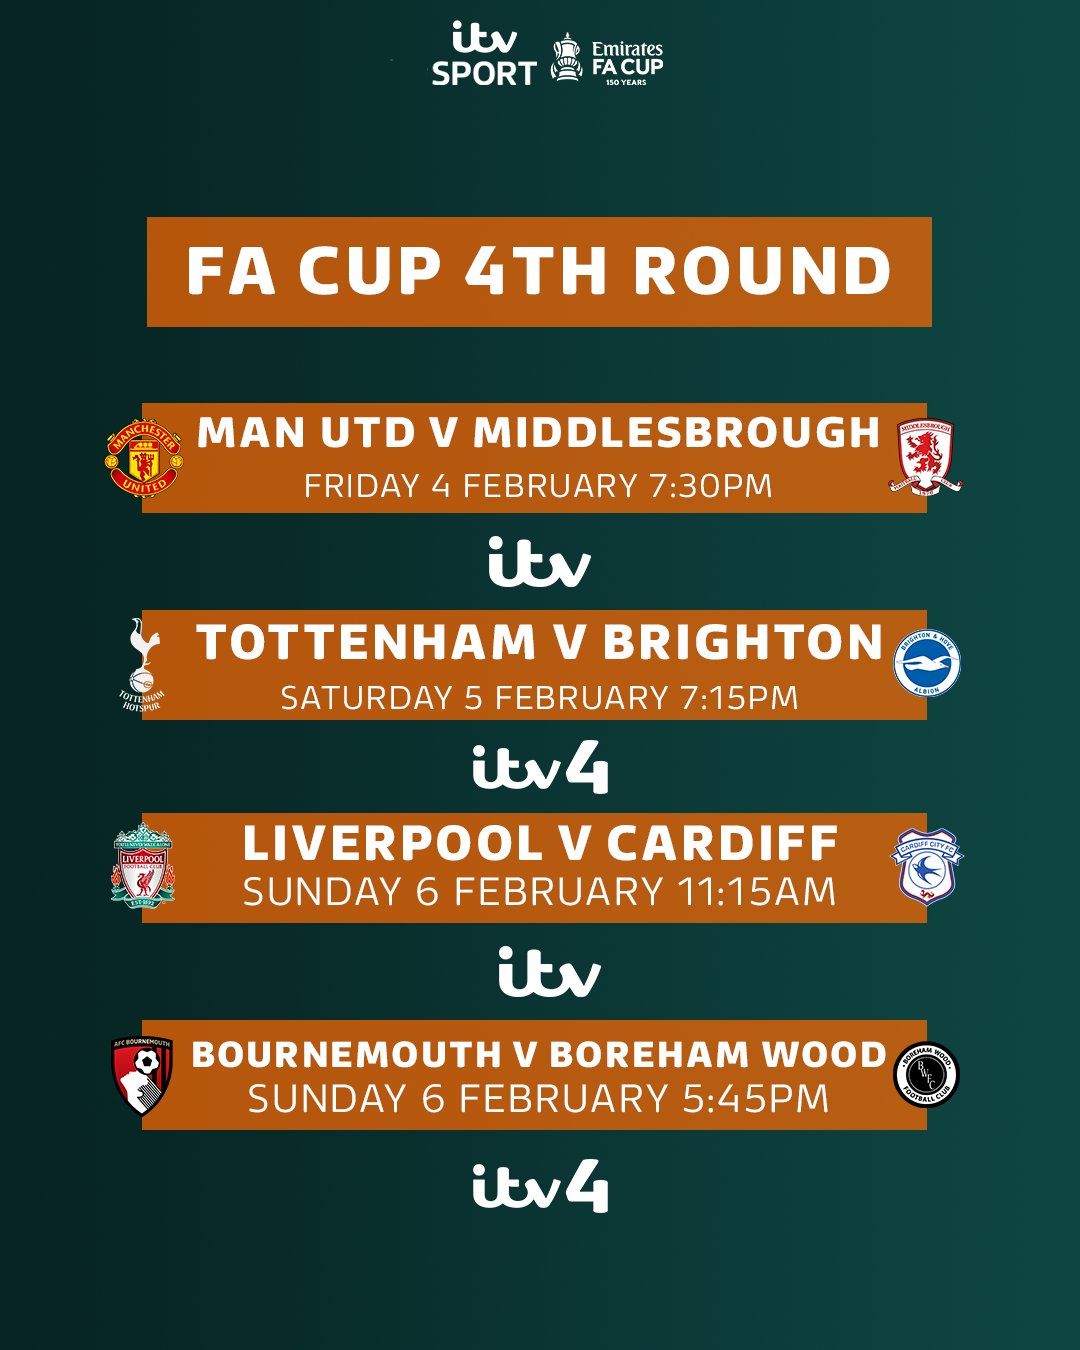 ITV Football on Twitter: "🚨 FA CUP 4TH ROUND LIVE ON @ITV THIS WEEKEND 🚨  Here's a reminder of what we're showing across the @EmiratesFACup this  weekend 🏆⚽️ #ITVFootball https://t.co/EKyjWamVAa" / Twitter